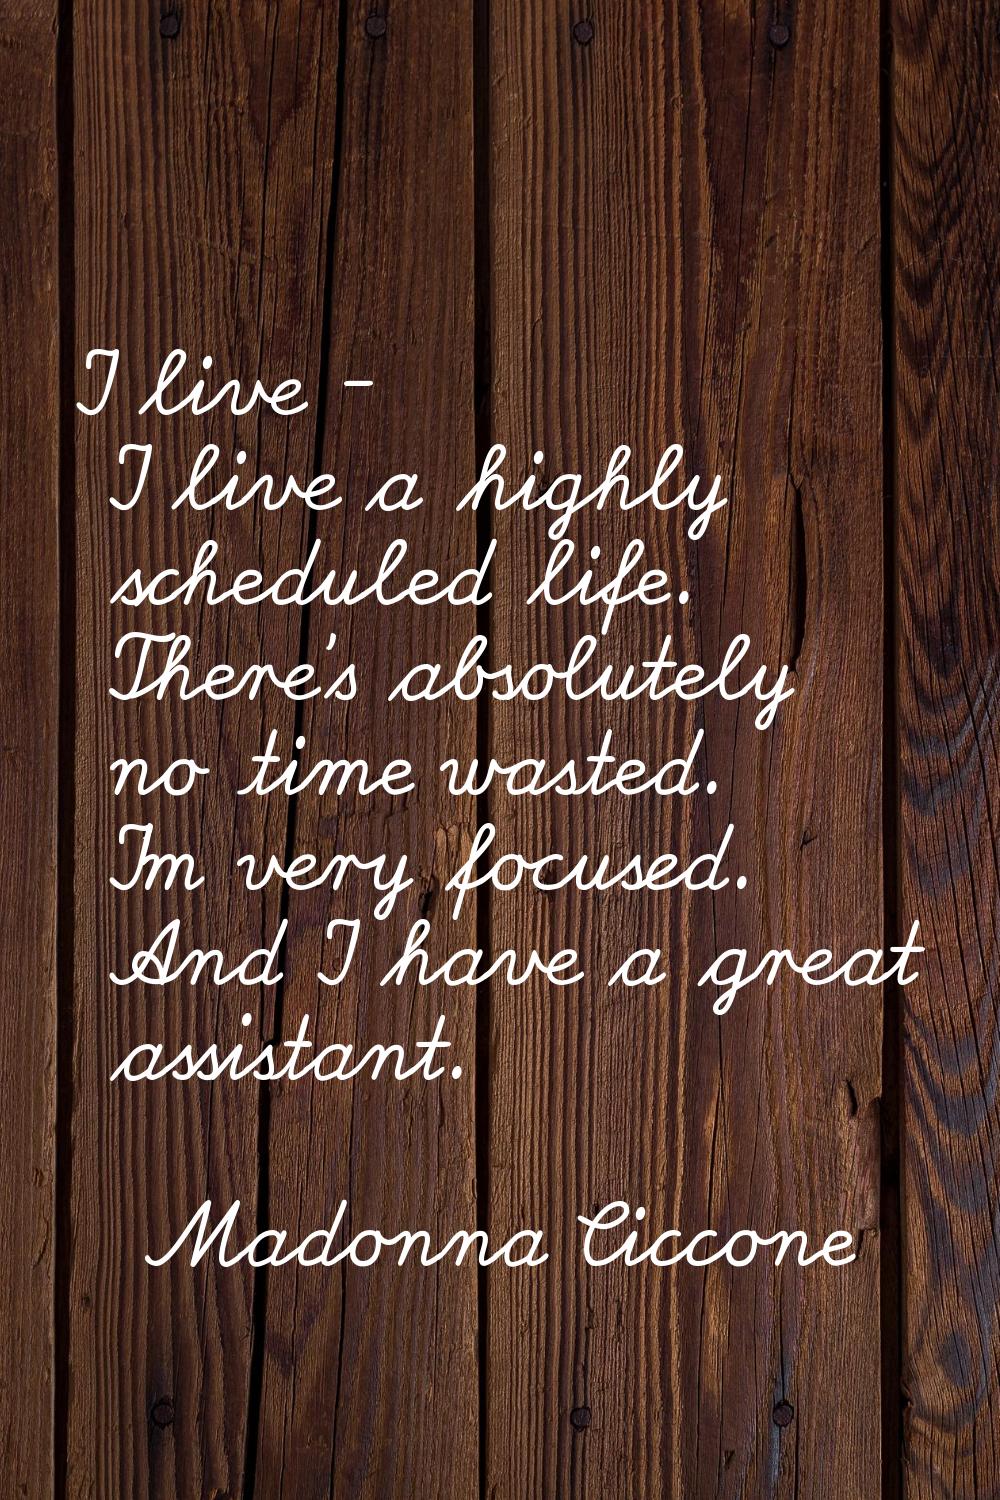 I live - I live a highly scheduled life. There's absolutely no time wasted. I'm very focused. And I